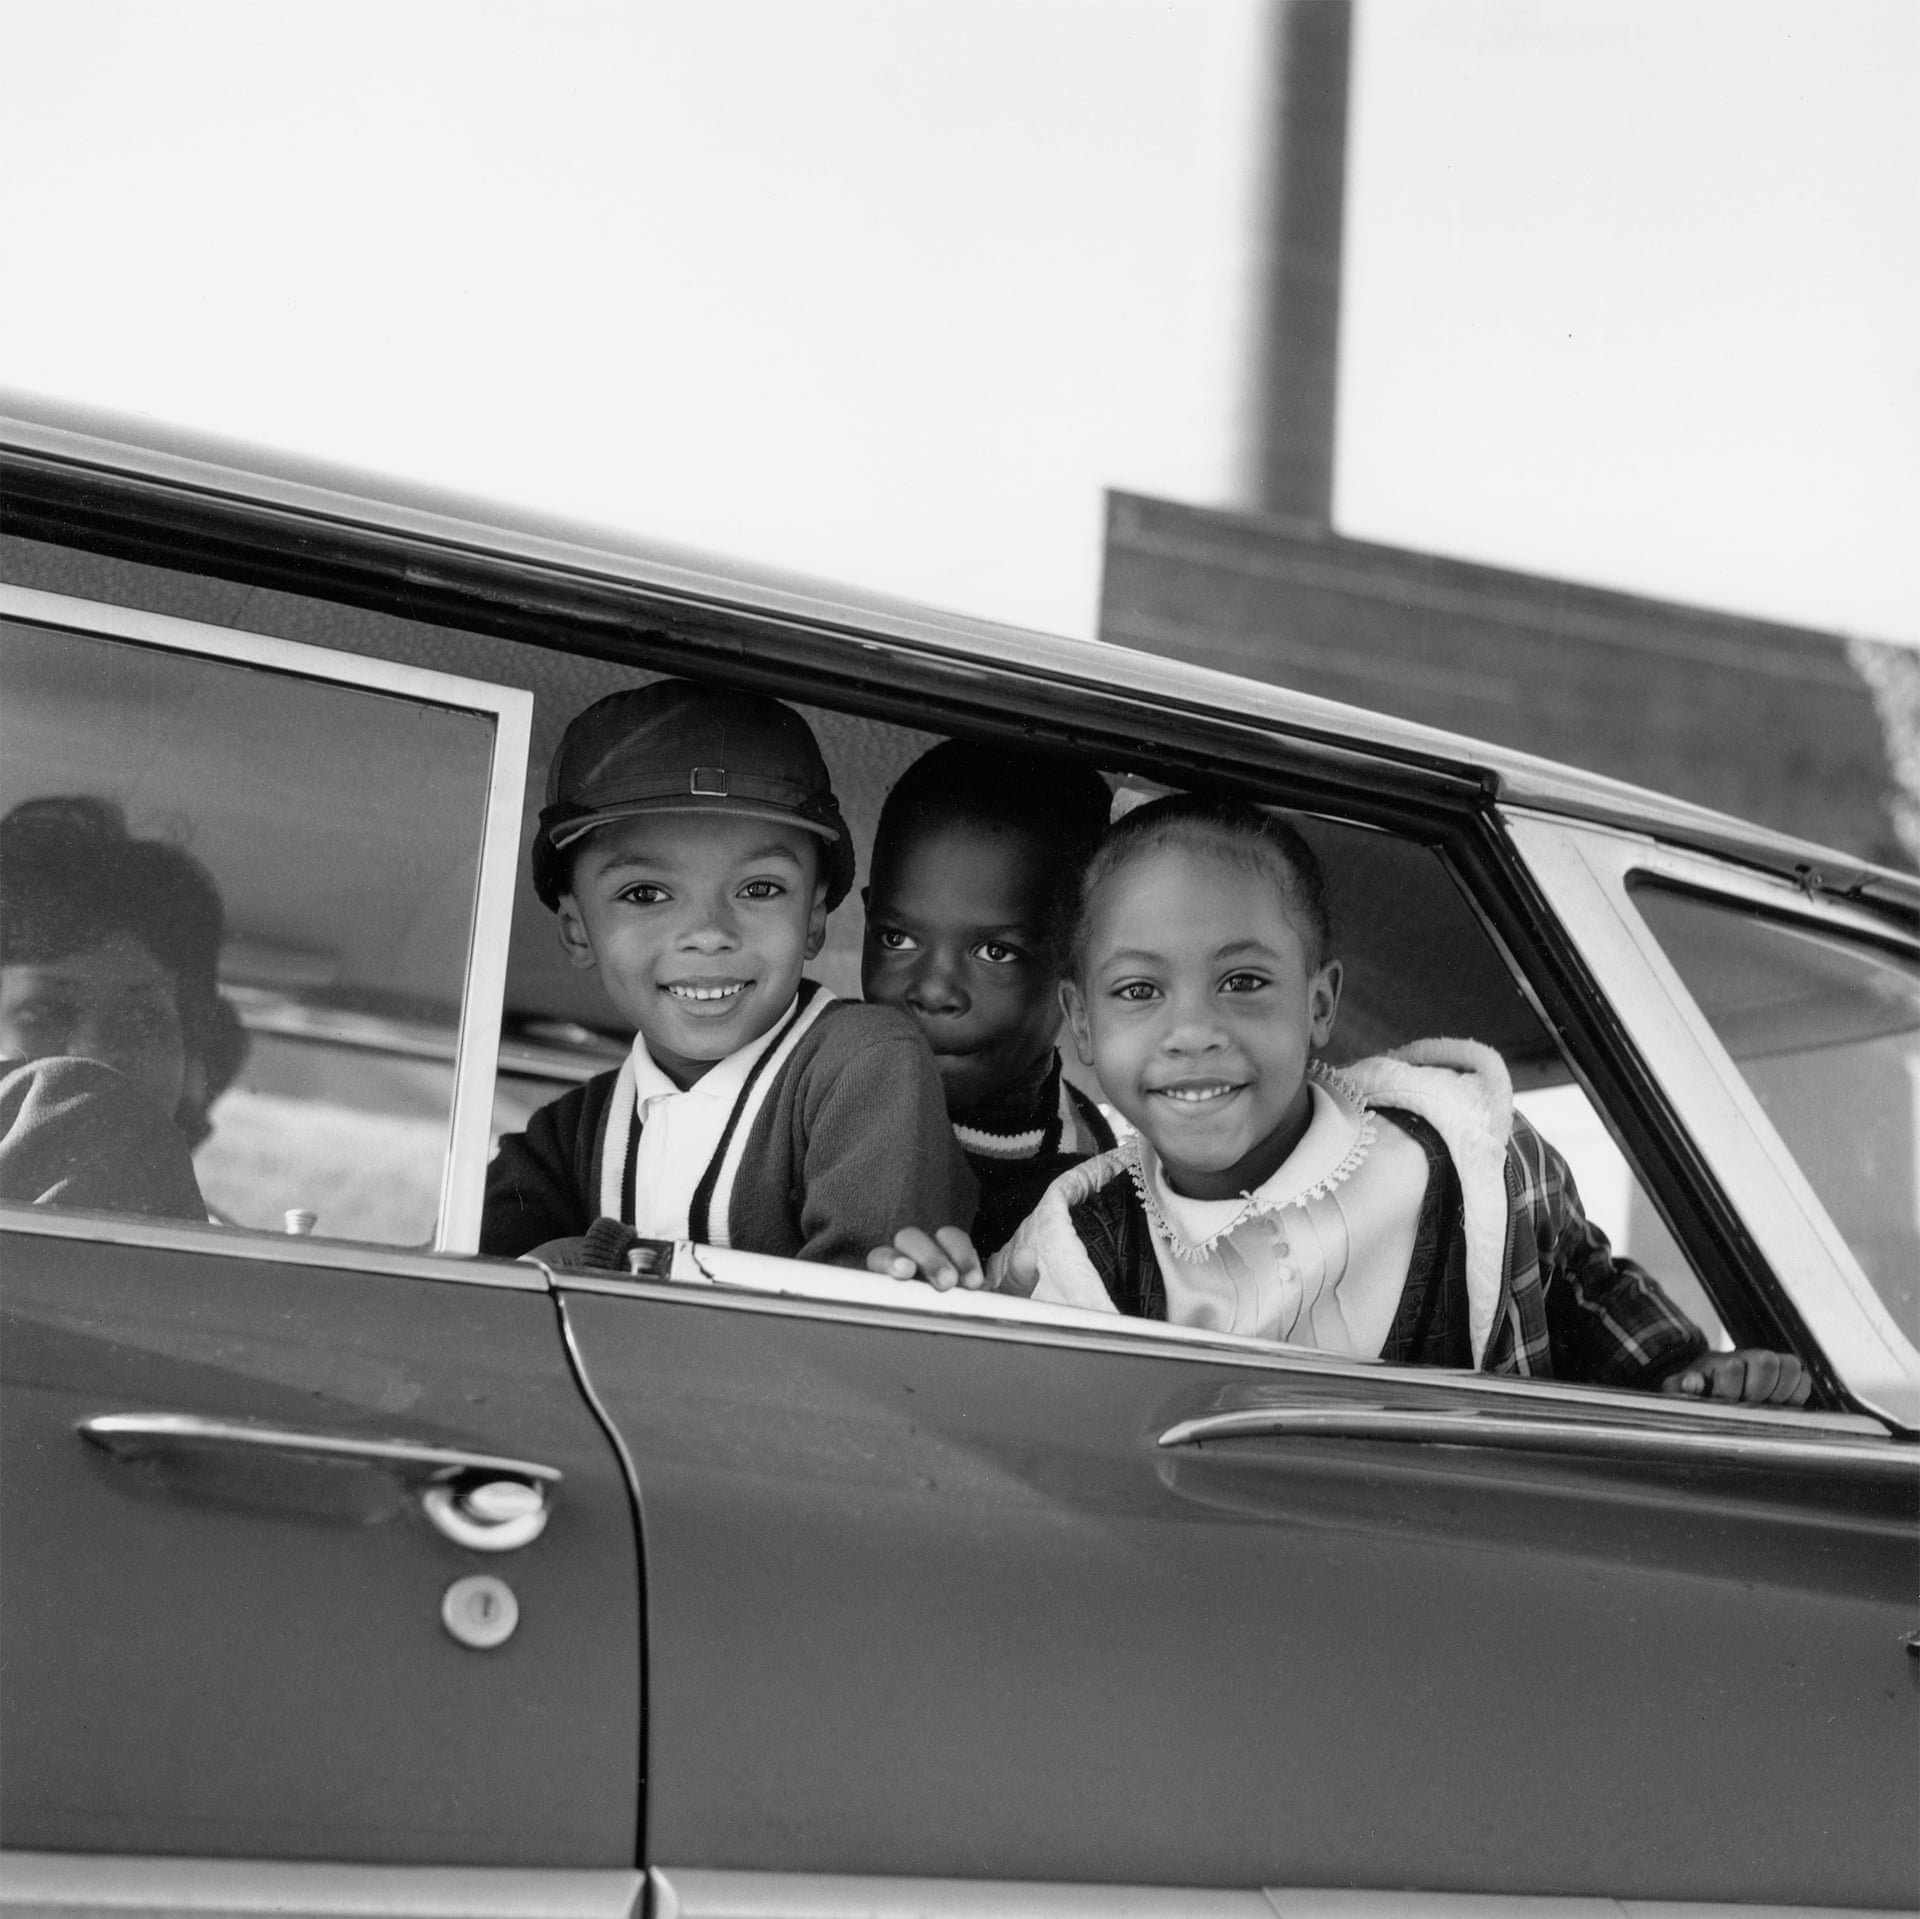 Michael Willis, Harry Williams and Dwania Kyles sit in the back of a car during the first day of Memphis school integration, 1961